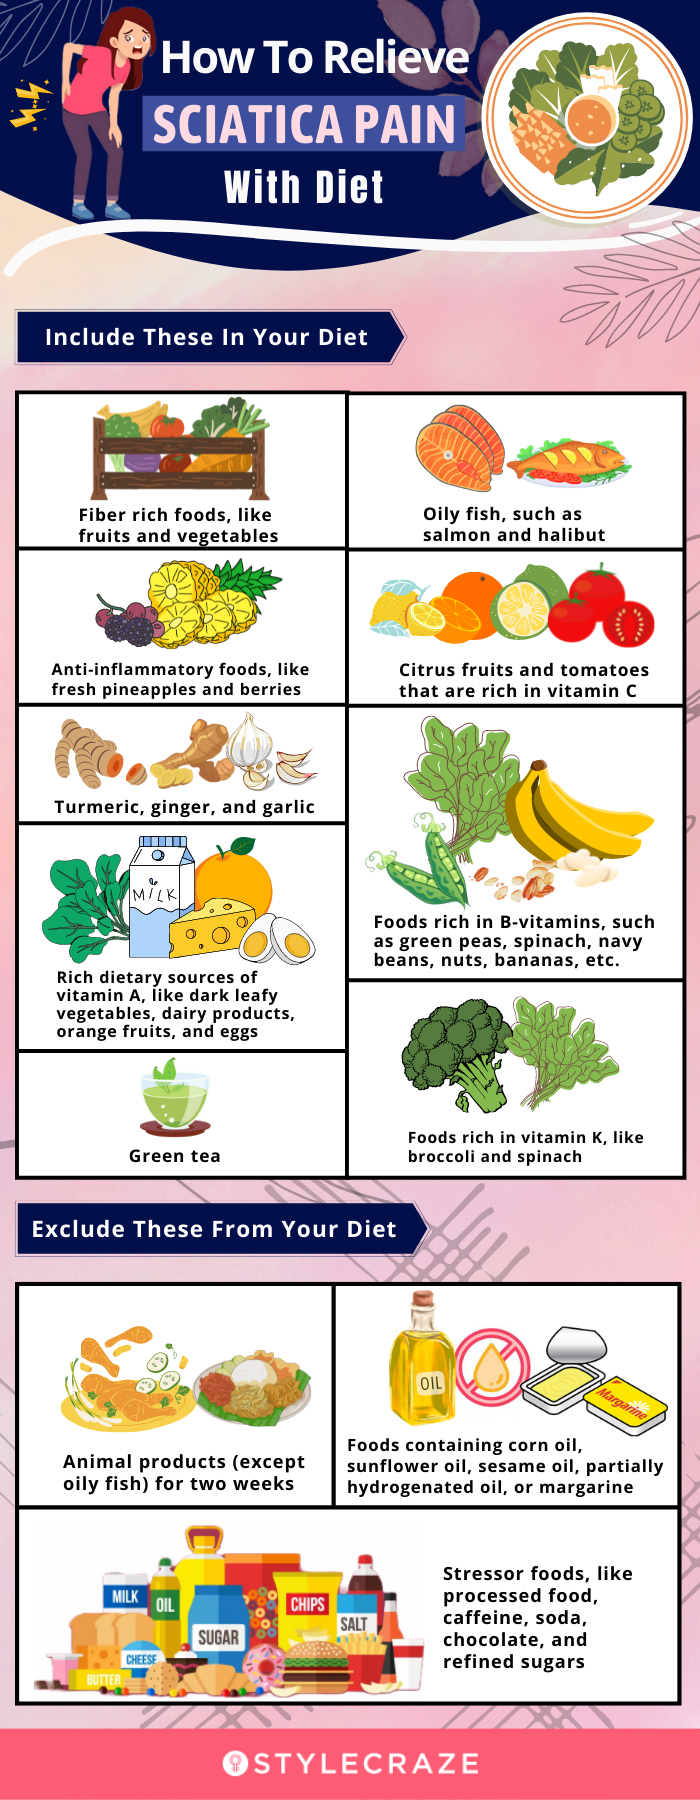 how to relieve sciatica pain with diet [infographic]